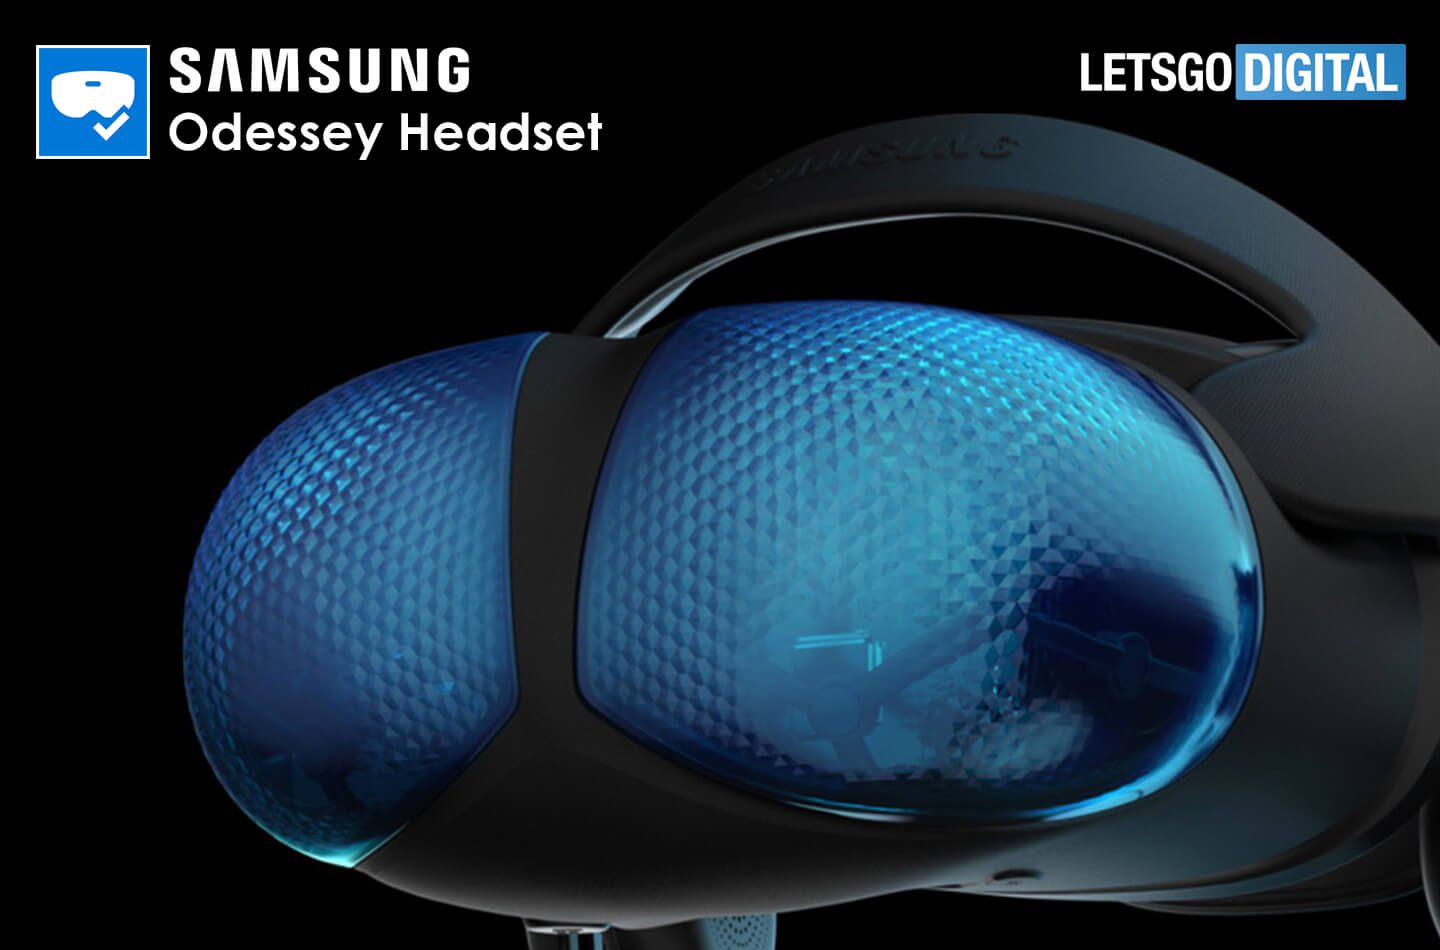 Samsung is working on a groovy new Mixed Reality Odyssey headset